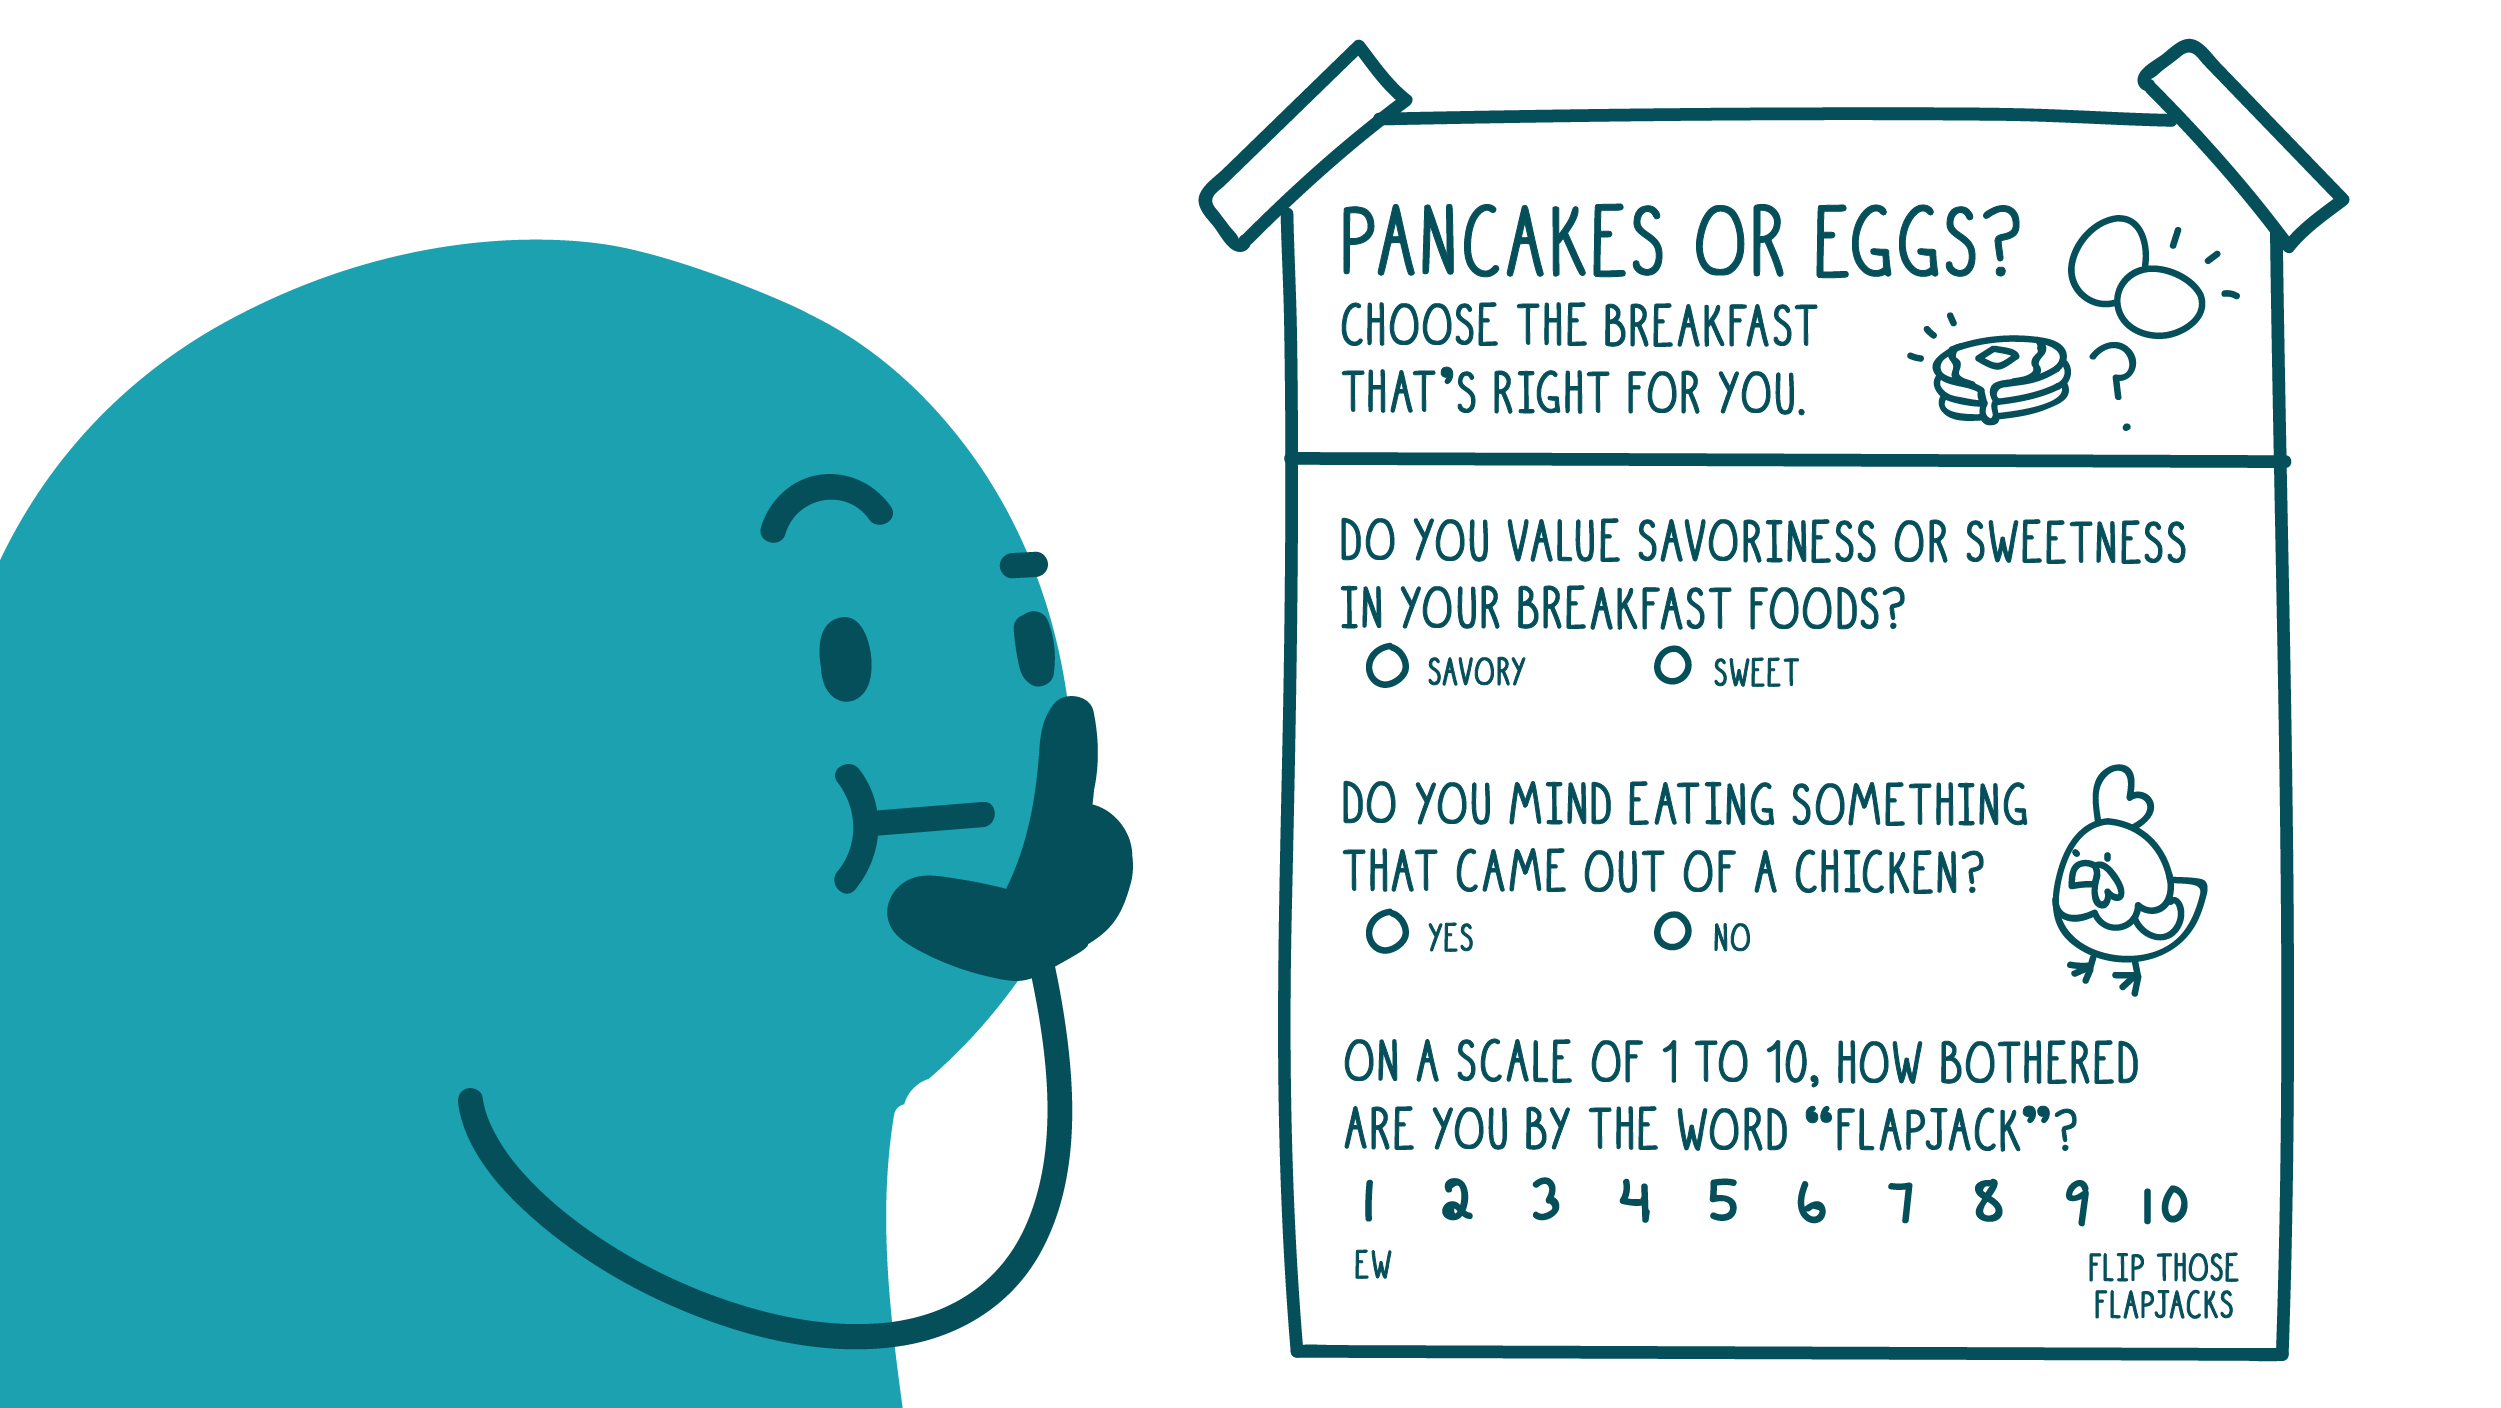 Alt: A doodle considers a decision aid titled, “Pancakes or eggs? Choose the breakfast that’s right for you.” There are a few humorous question on the aid — for example, "On a scale of 1 to 10, how bothered are you by the word 'flapjack'?"